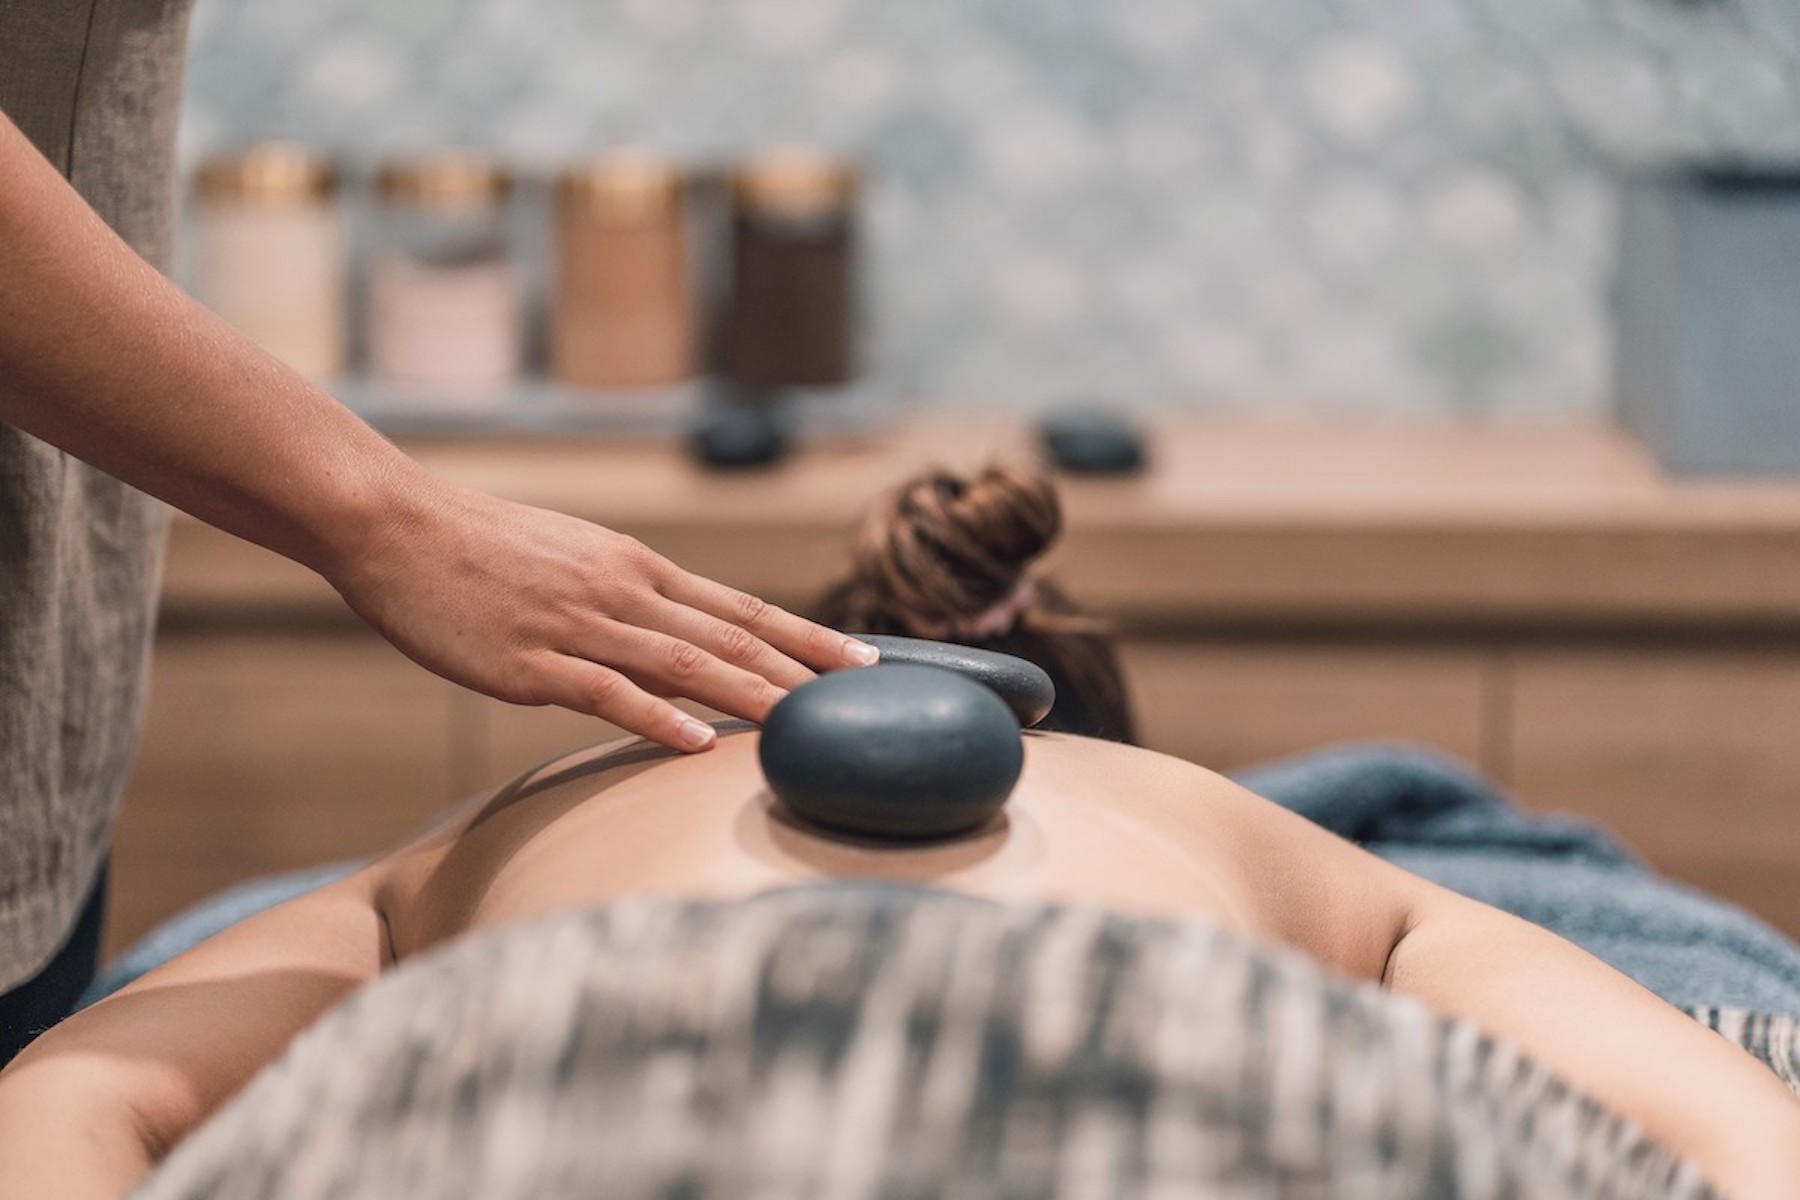 A lady lying on a massage table with stones on her back for a relaxation massage